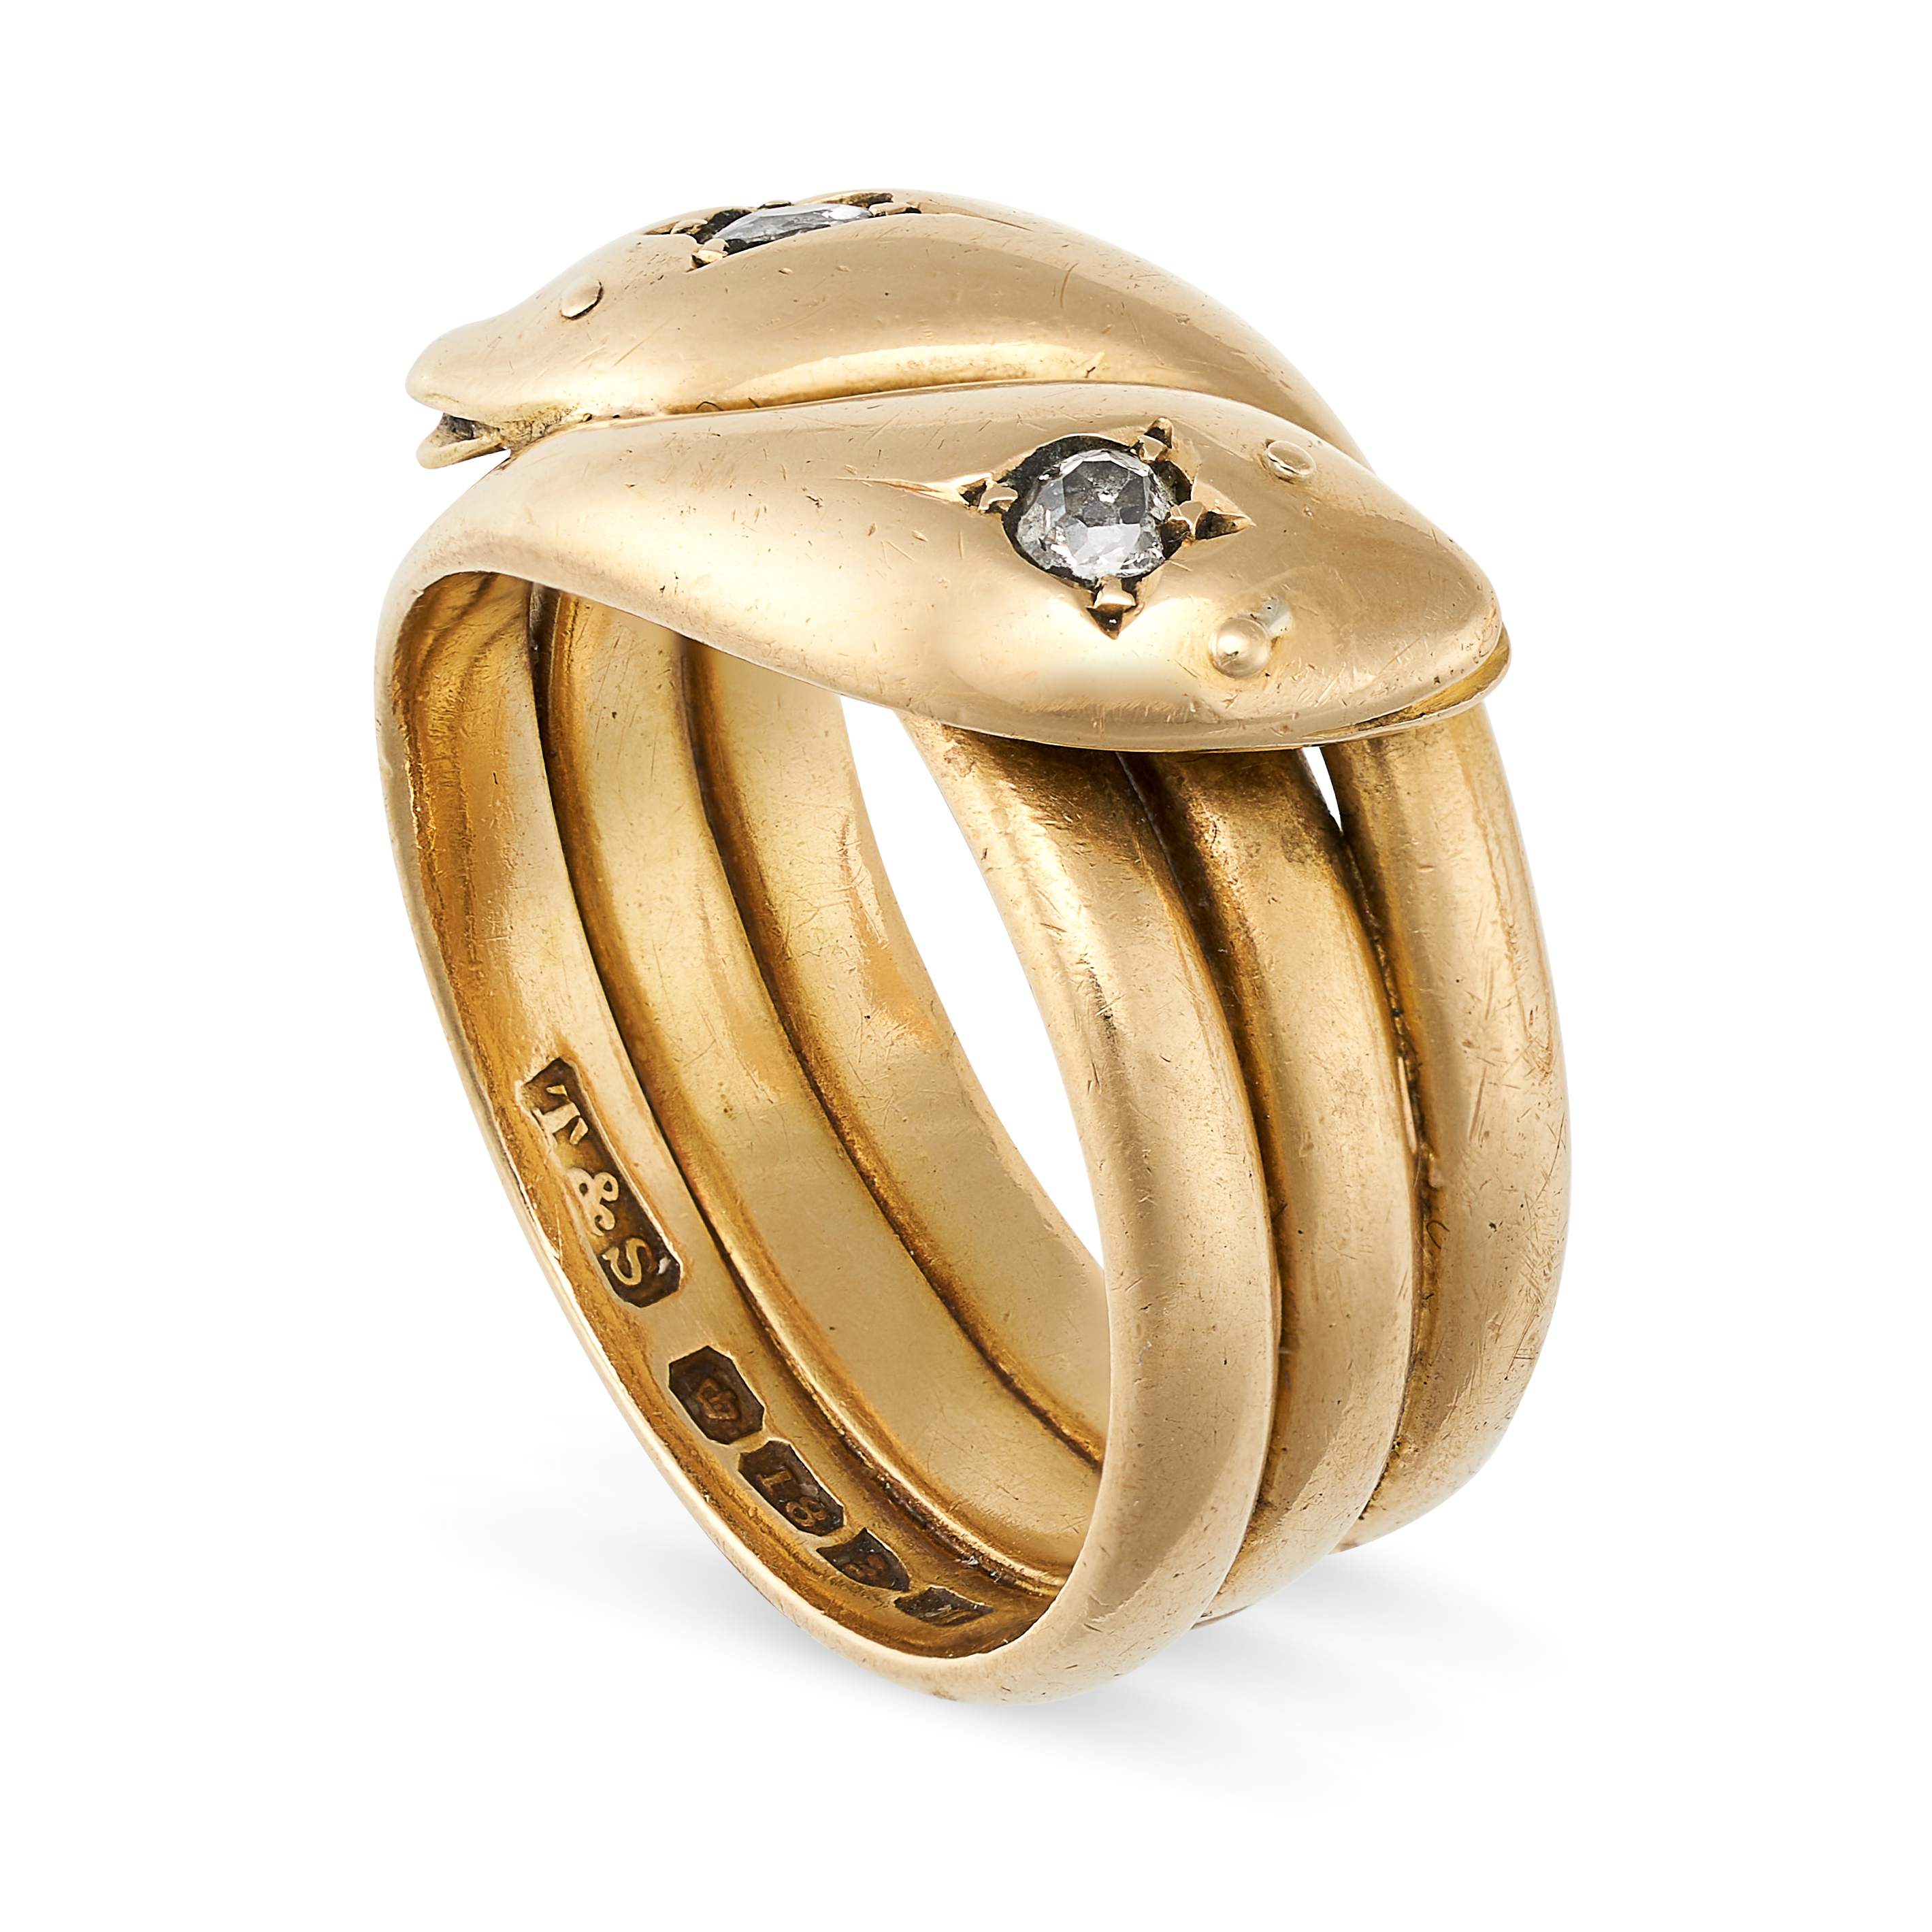 AN ANTIQUE EDWARDIAN DIAMOND SNAKE RING in 18ct yellow gold, designed as two coiled snakes, each ... - Image 2 of 2